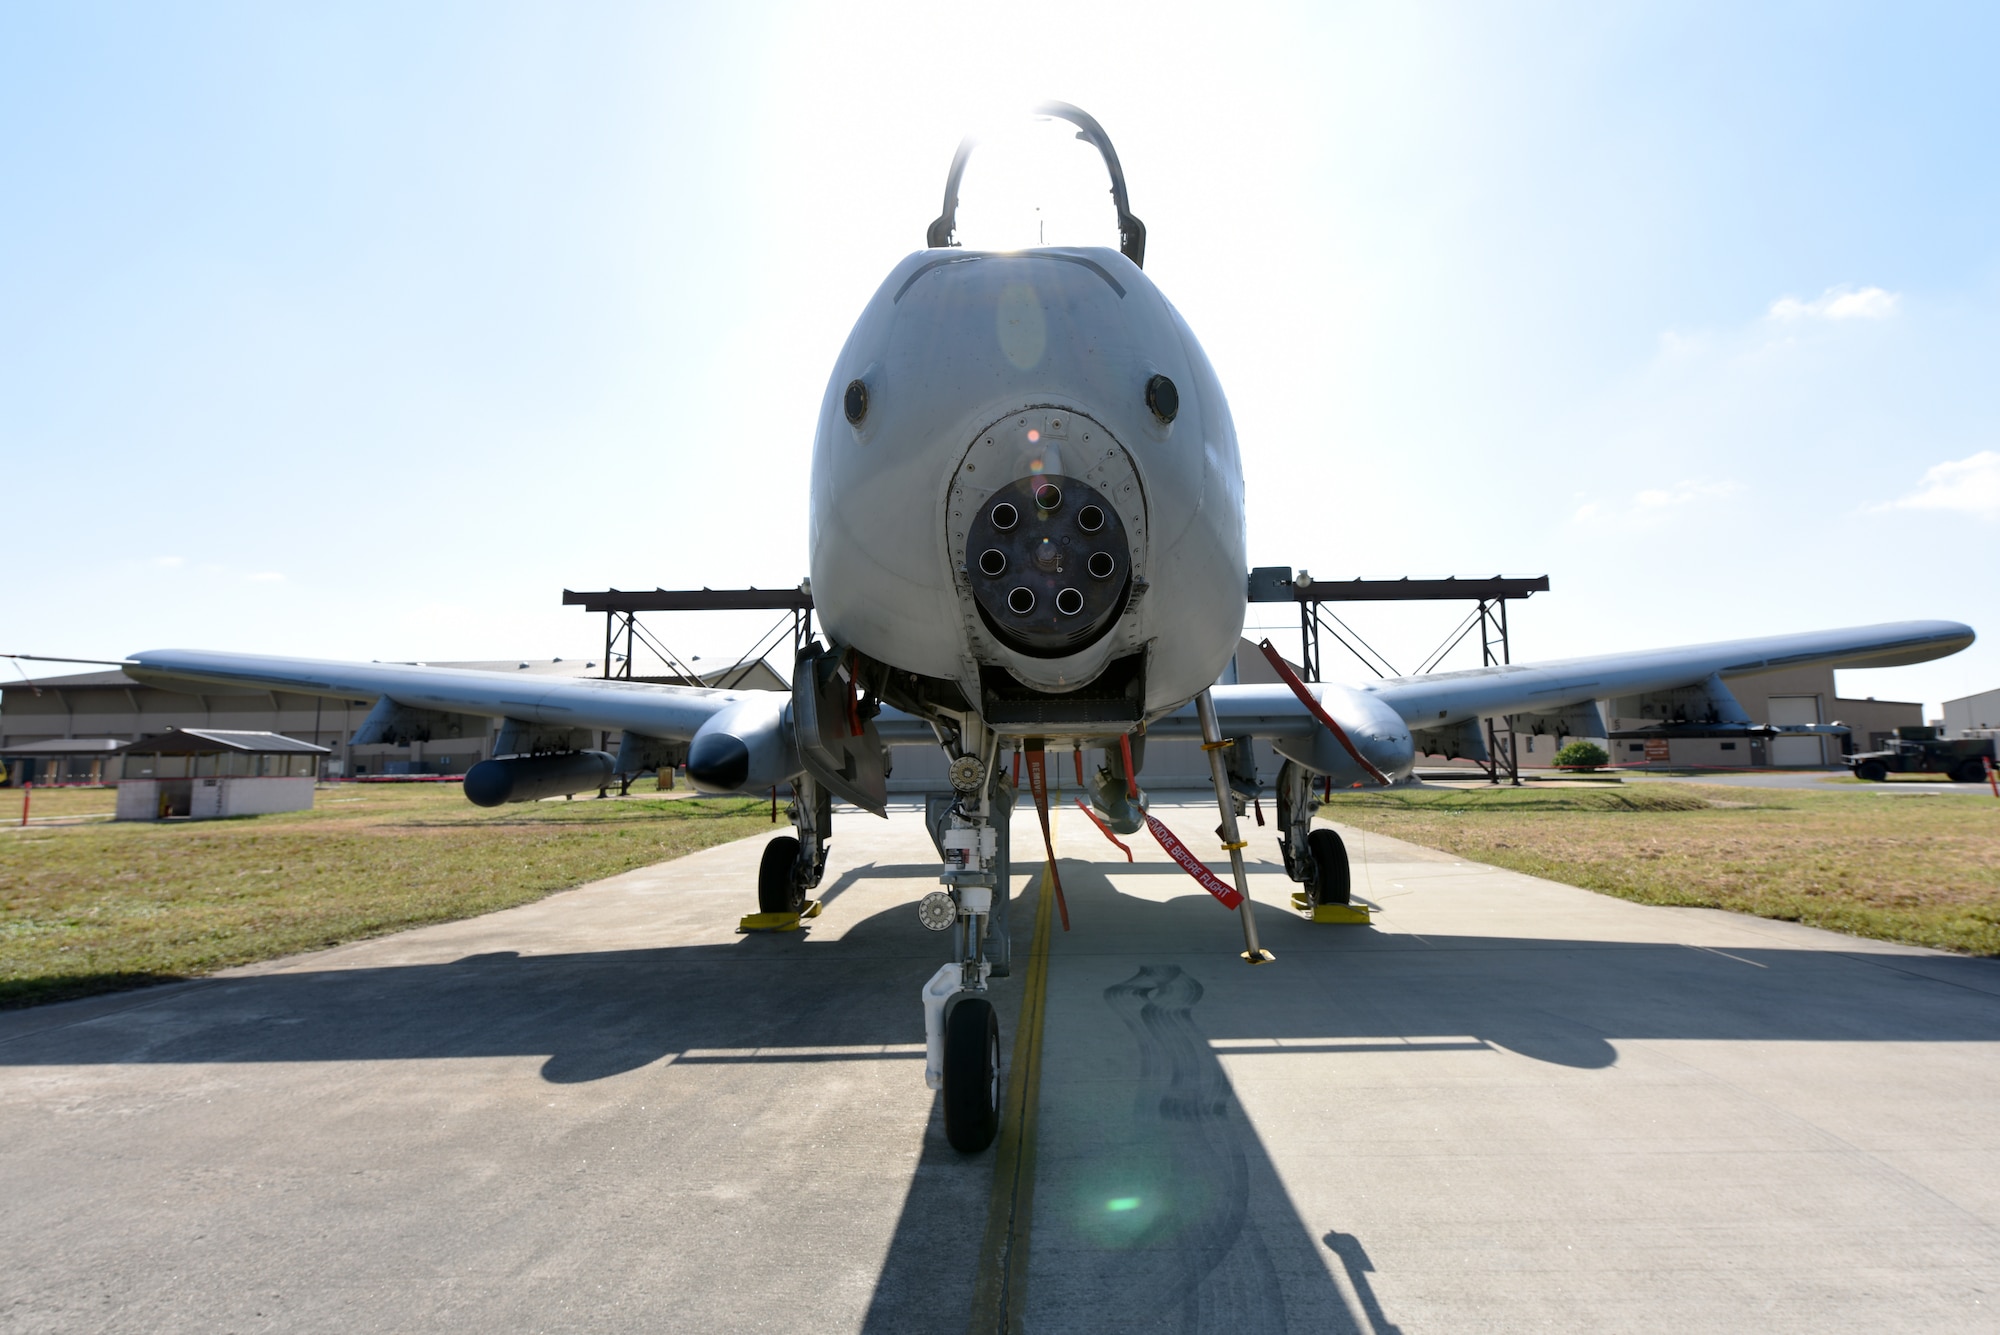 A U.S. Air Force A-10 Thunderbolt II aircraft from Osan Air Base, Republic of Korea, is ready to be loaded before the 2019 Penn Fest competition at Kunsan Air Base, ROK, Oct. 19, 2019. The 25th Aircraft Maintenance Unit won the competition when they loaded their aircraft quicker than other teams. (U.S. Air Force photo by Staff Sgt. Joshua Edwards)